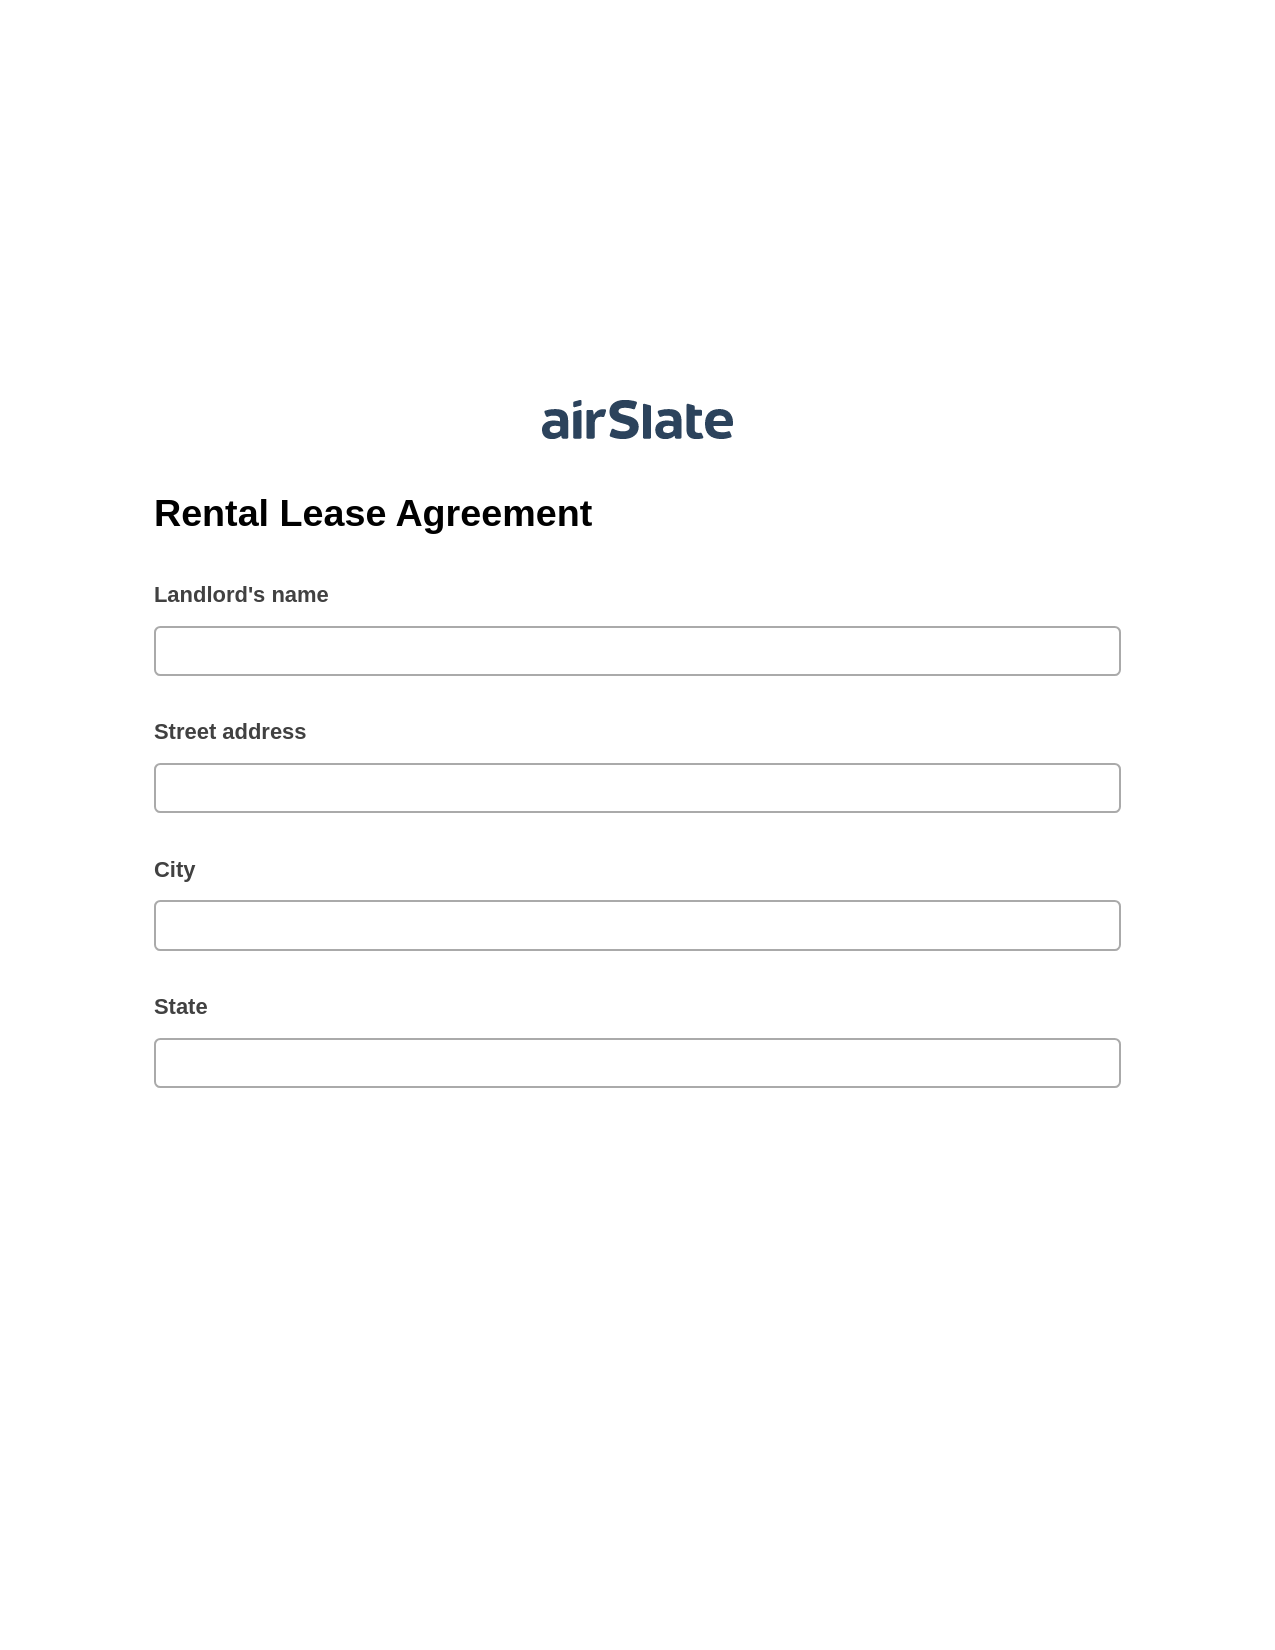 Rental Lease Agreement Pre-fill from Salesforce Records with SOQL Bot, Create Salesforce Record Bot, Dropbox Bot